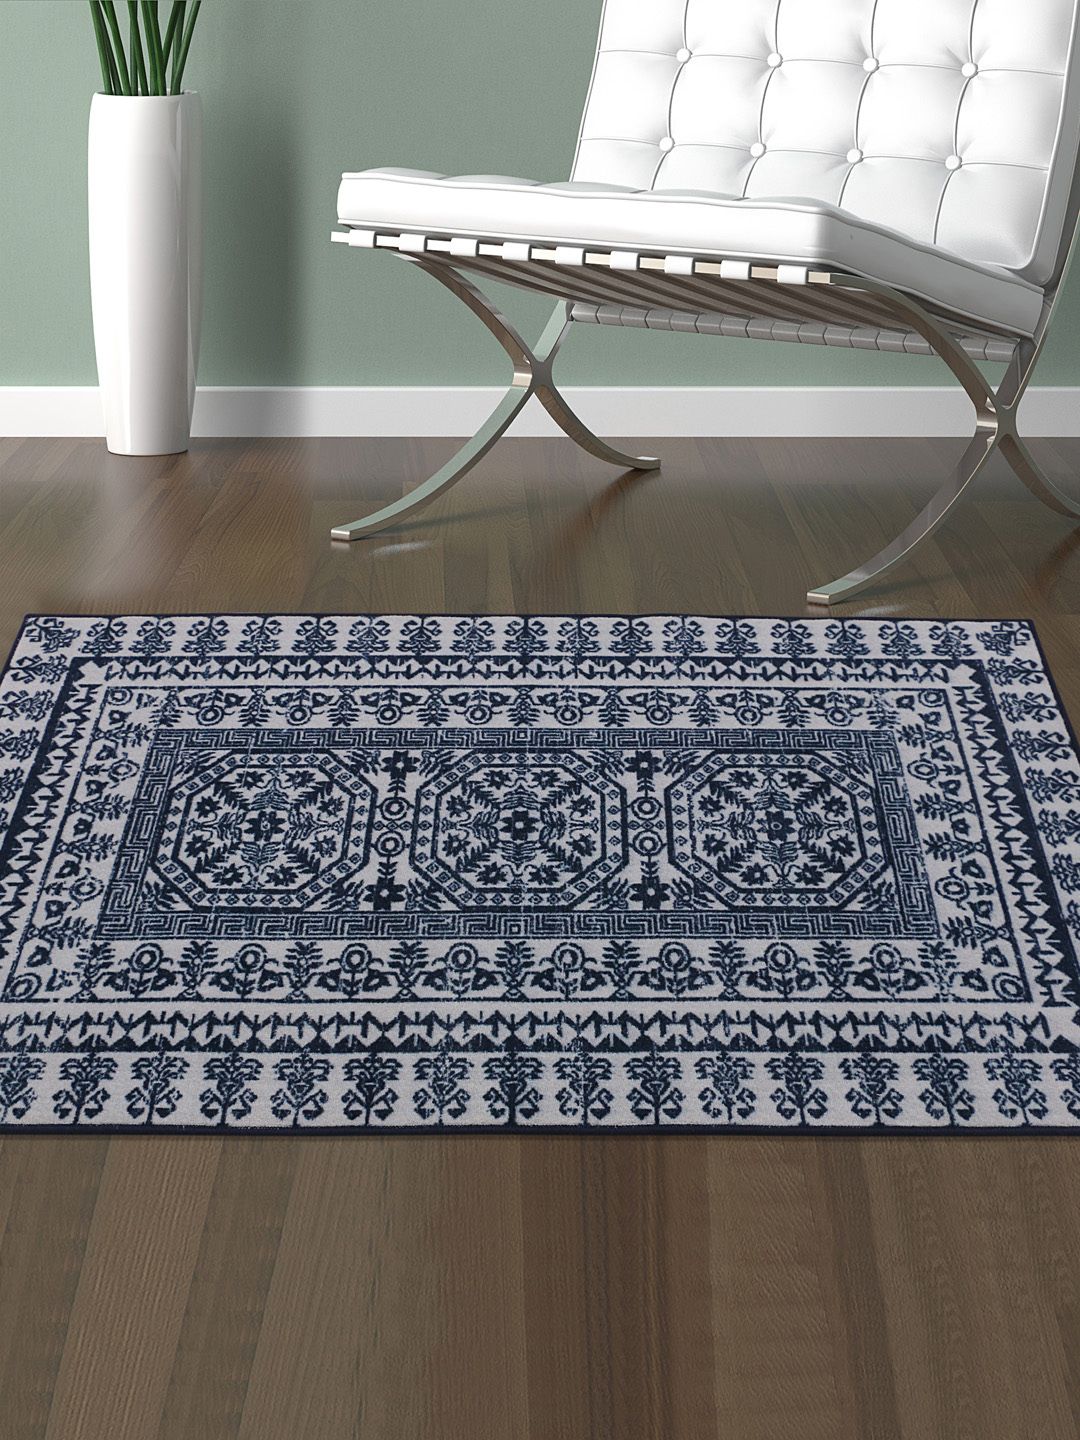 RUGSMITH Blue & White Patterned Anti-Skid Carpet Price in India